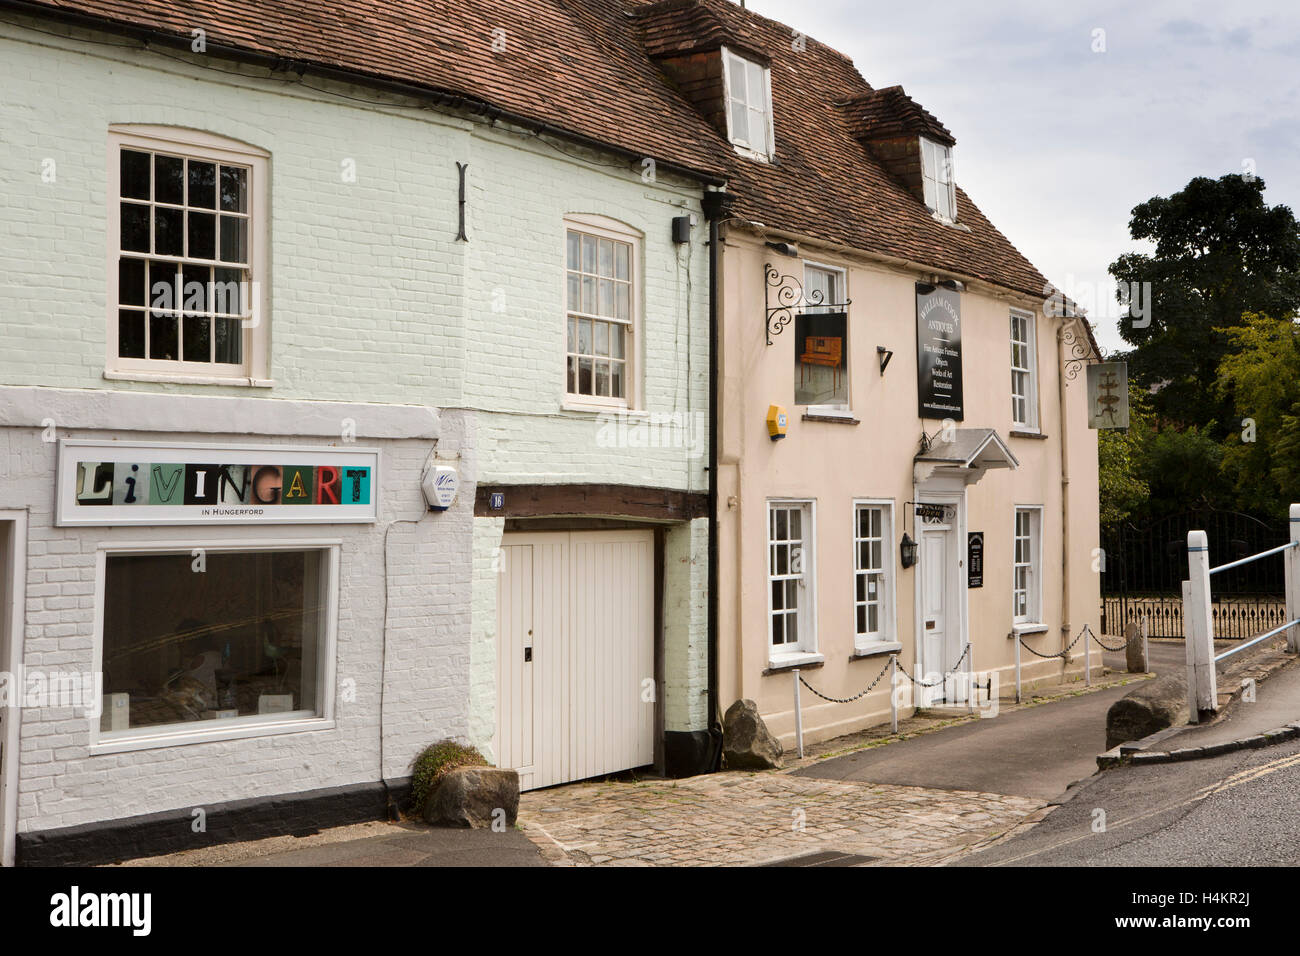 England, Berkshire, Hungerford, Bridge Street, Living Art Gallery and Antiques Shop in canalside buildings Stock Photo